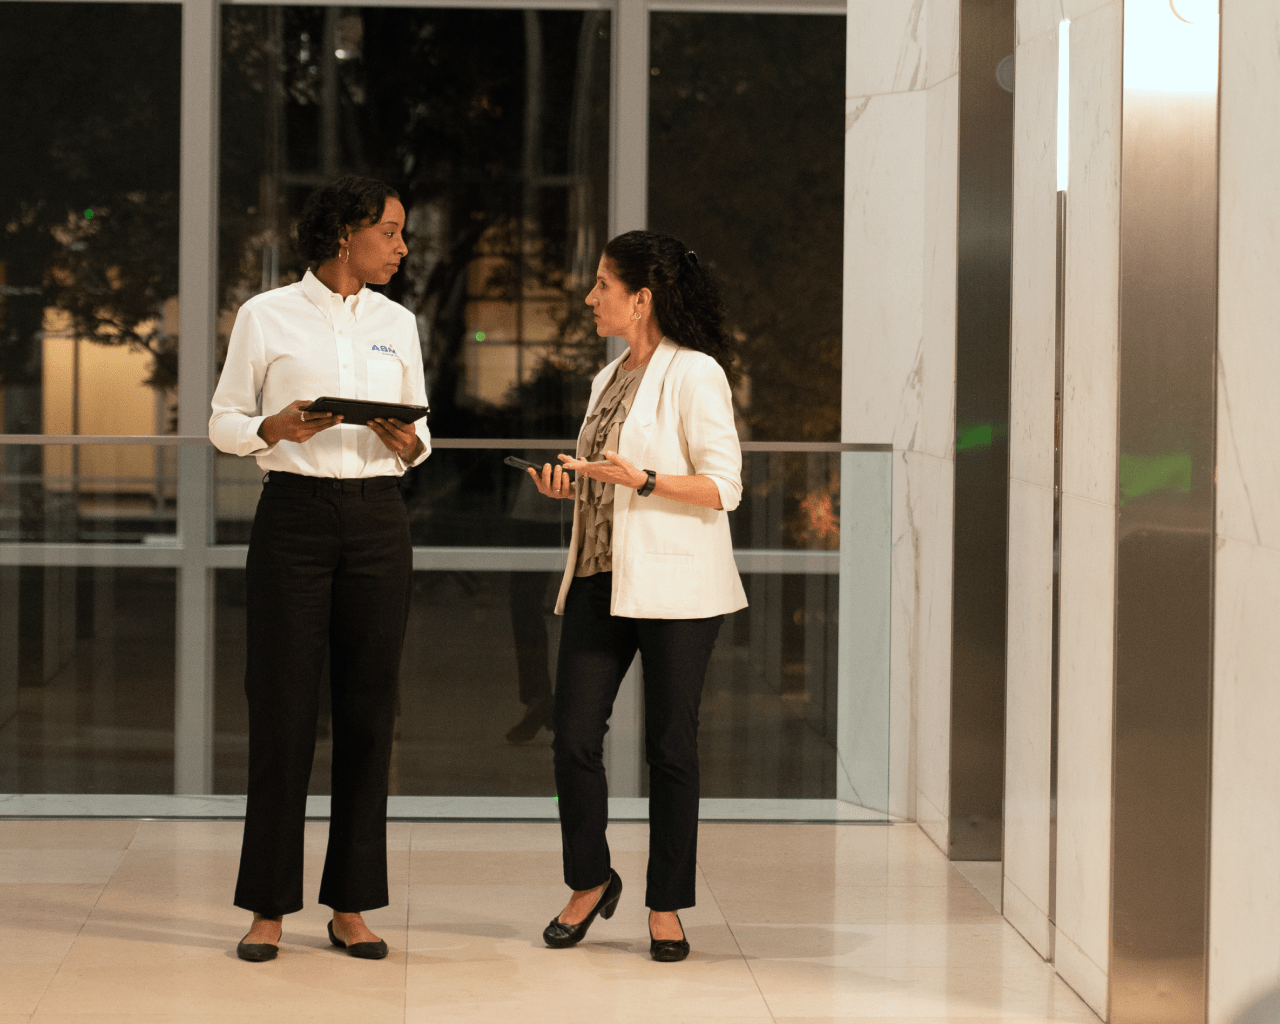 Female ABM engineer speaking with a hotel property manager beside the lobby elevators.